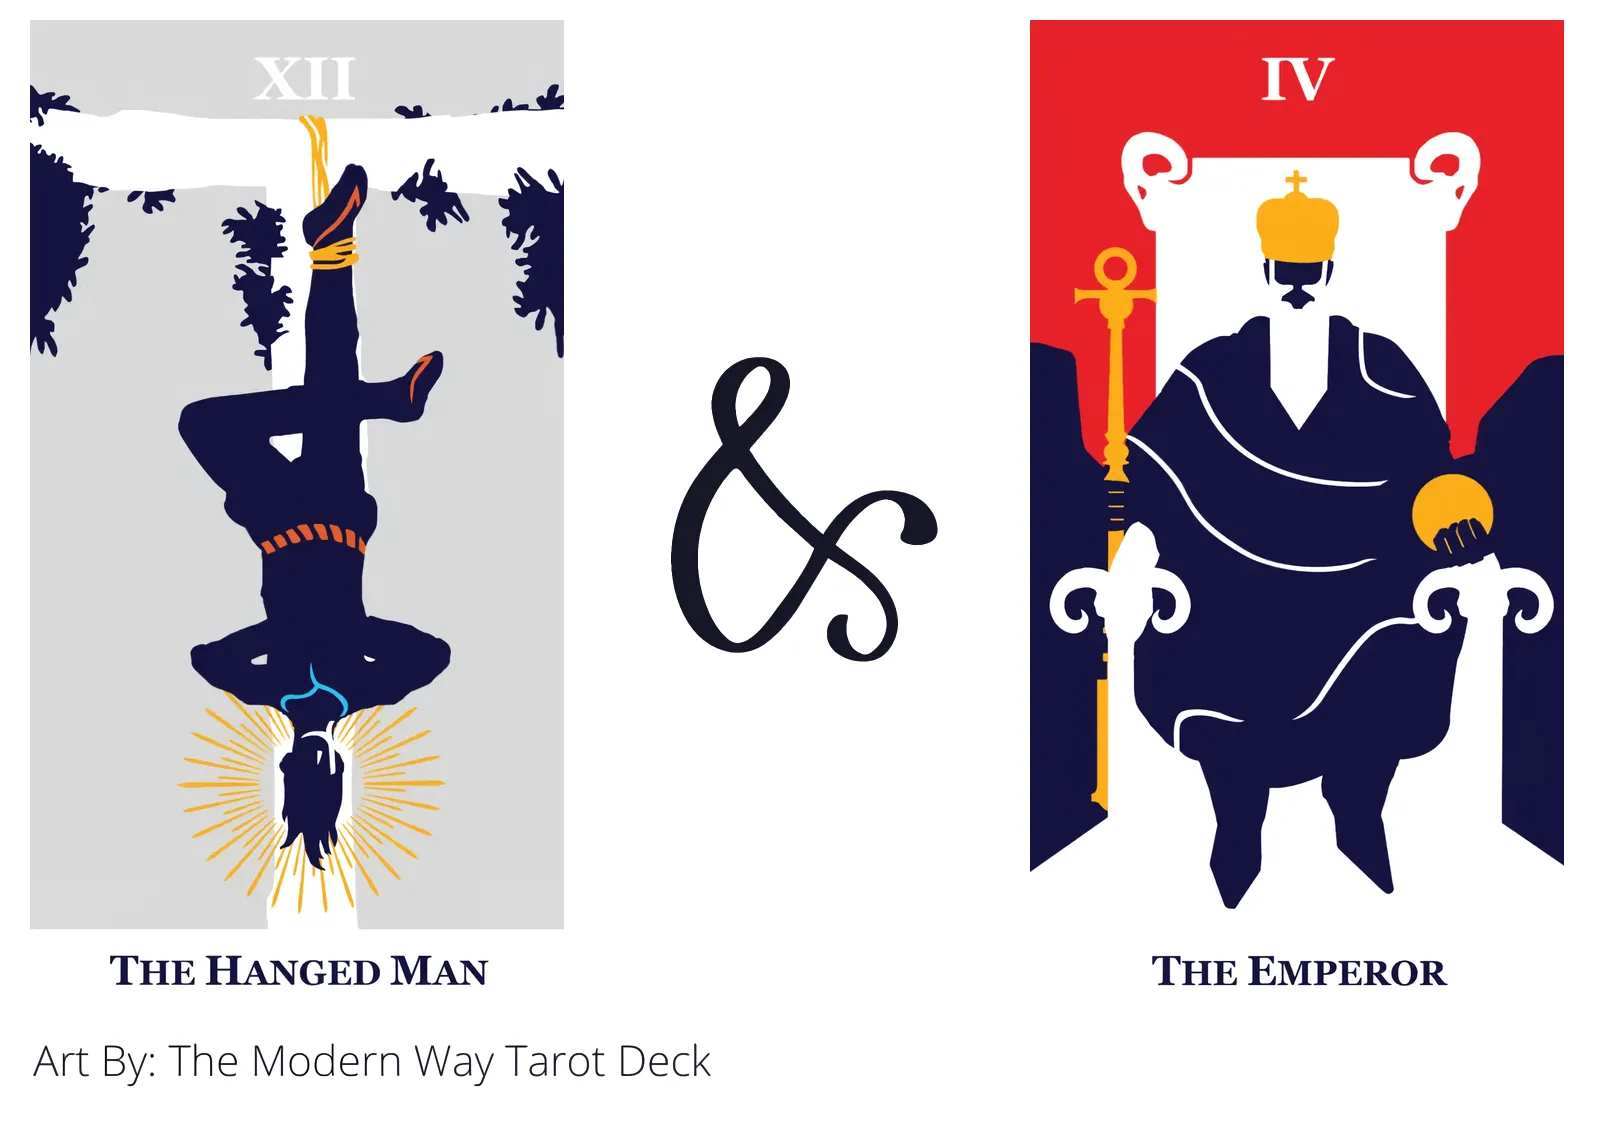 the hanged man and the emperor tarot cards together